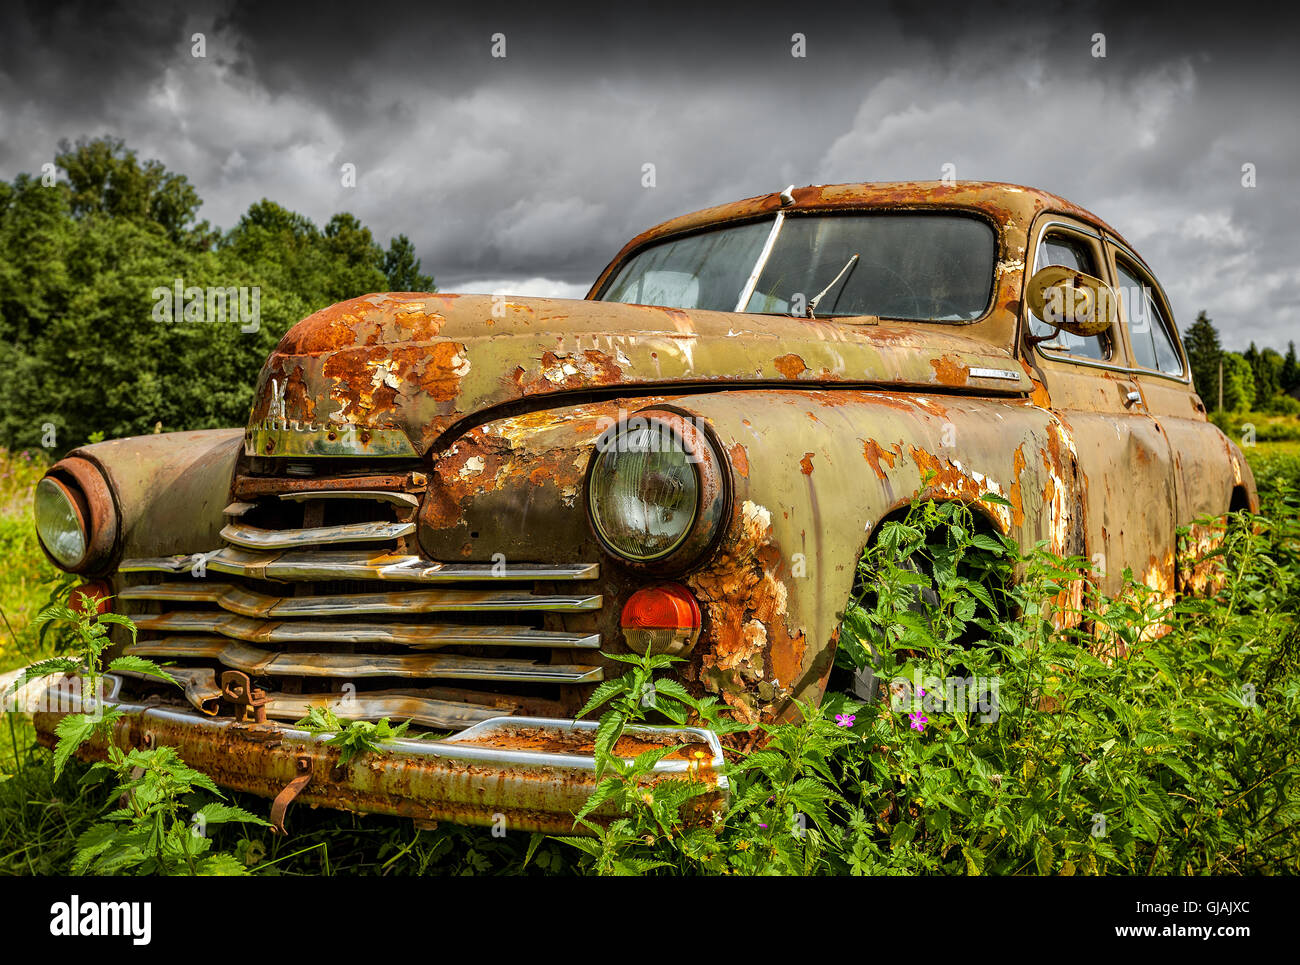 VOLGOVERKHOVYE, RUSSIA - August 3, 2016: Old Soviet car GAZ-M20 «Pobeda» on a private farm. It was was a passenger car produced Stock Photo